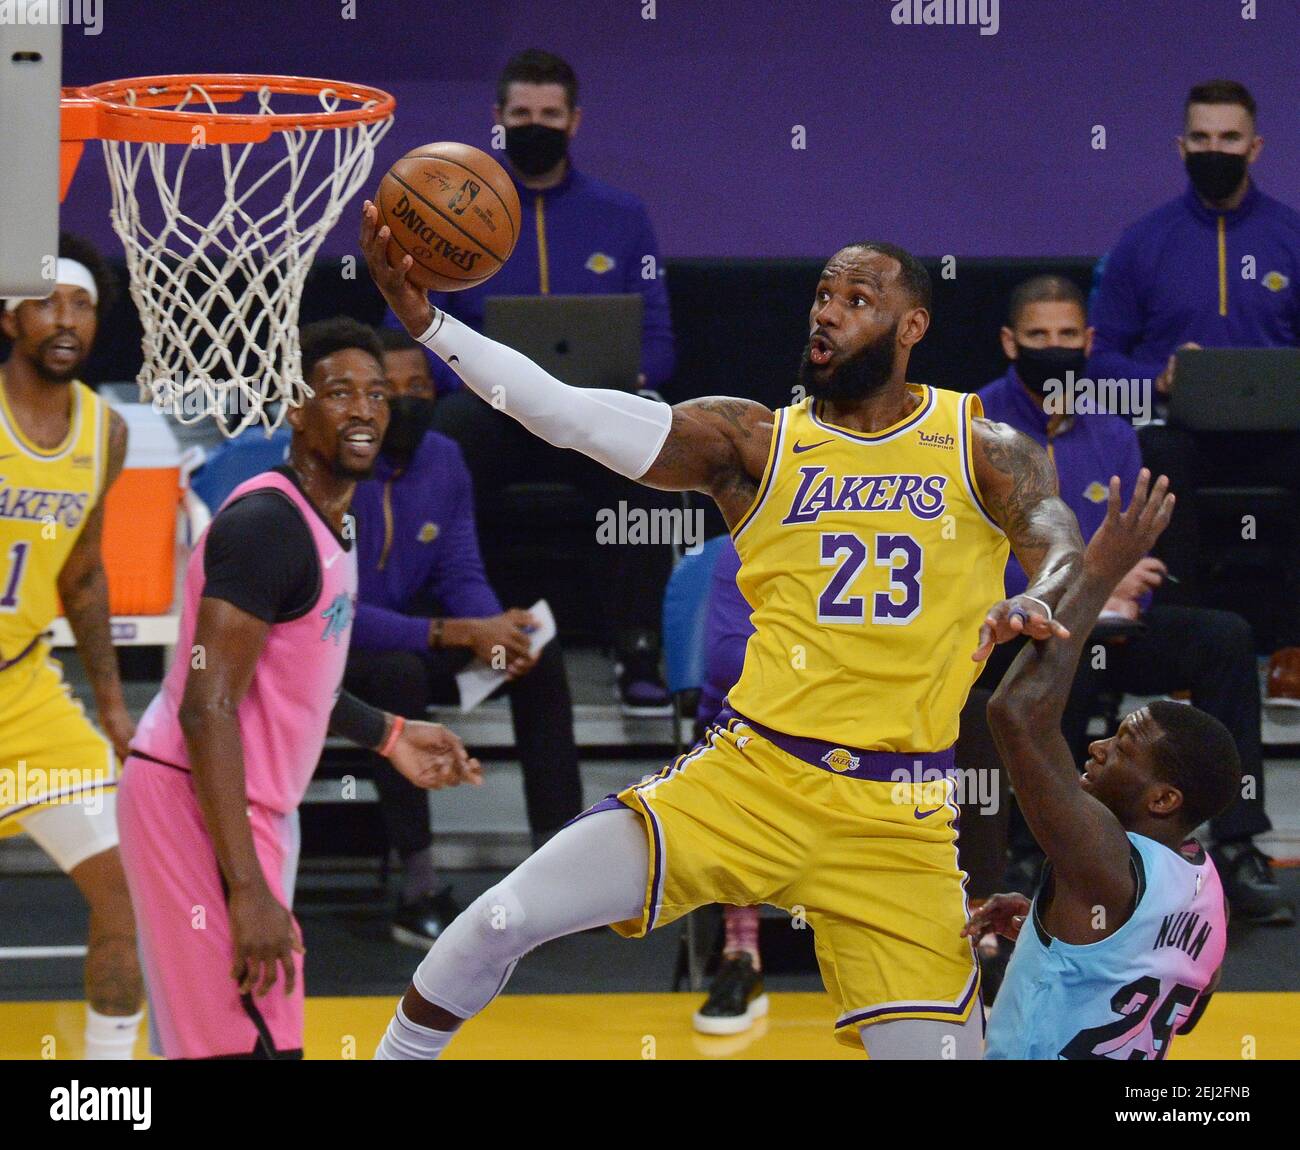 Los Angeles, United States. 20th Feb, 2021. Los Angeles Lakers' forward LeBron James puts up a shot in front of Miami Heat guard Kendrick Nunn during the first half of the Lakers' 96-94 loss at Staples Center in Los Angeles on Saturday, February 20, 2021. Photo by Jim Ruymen/UPI Credit: UPI/Alamy Live News Stock Photo